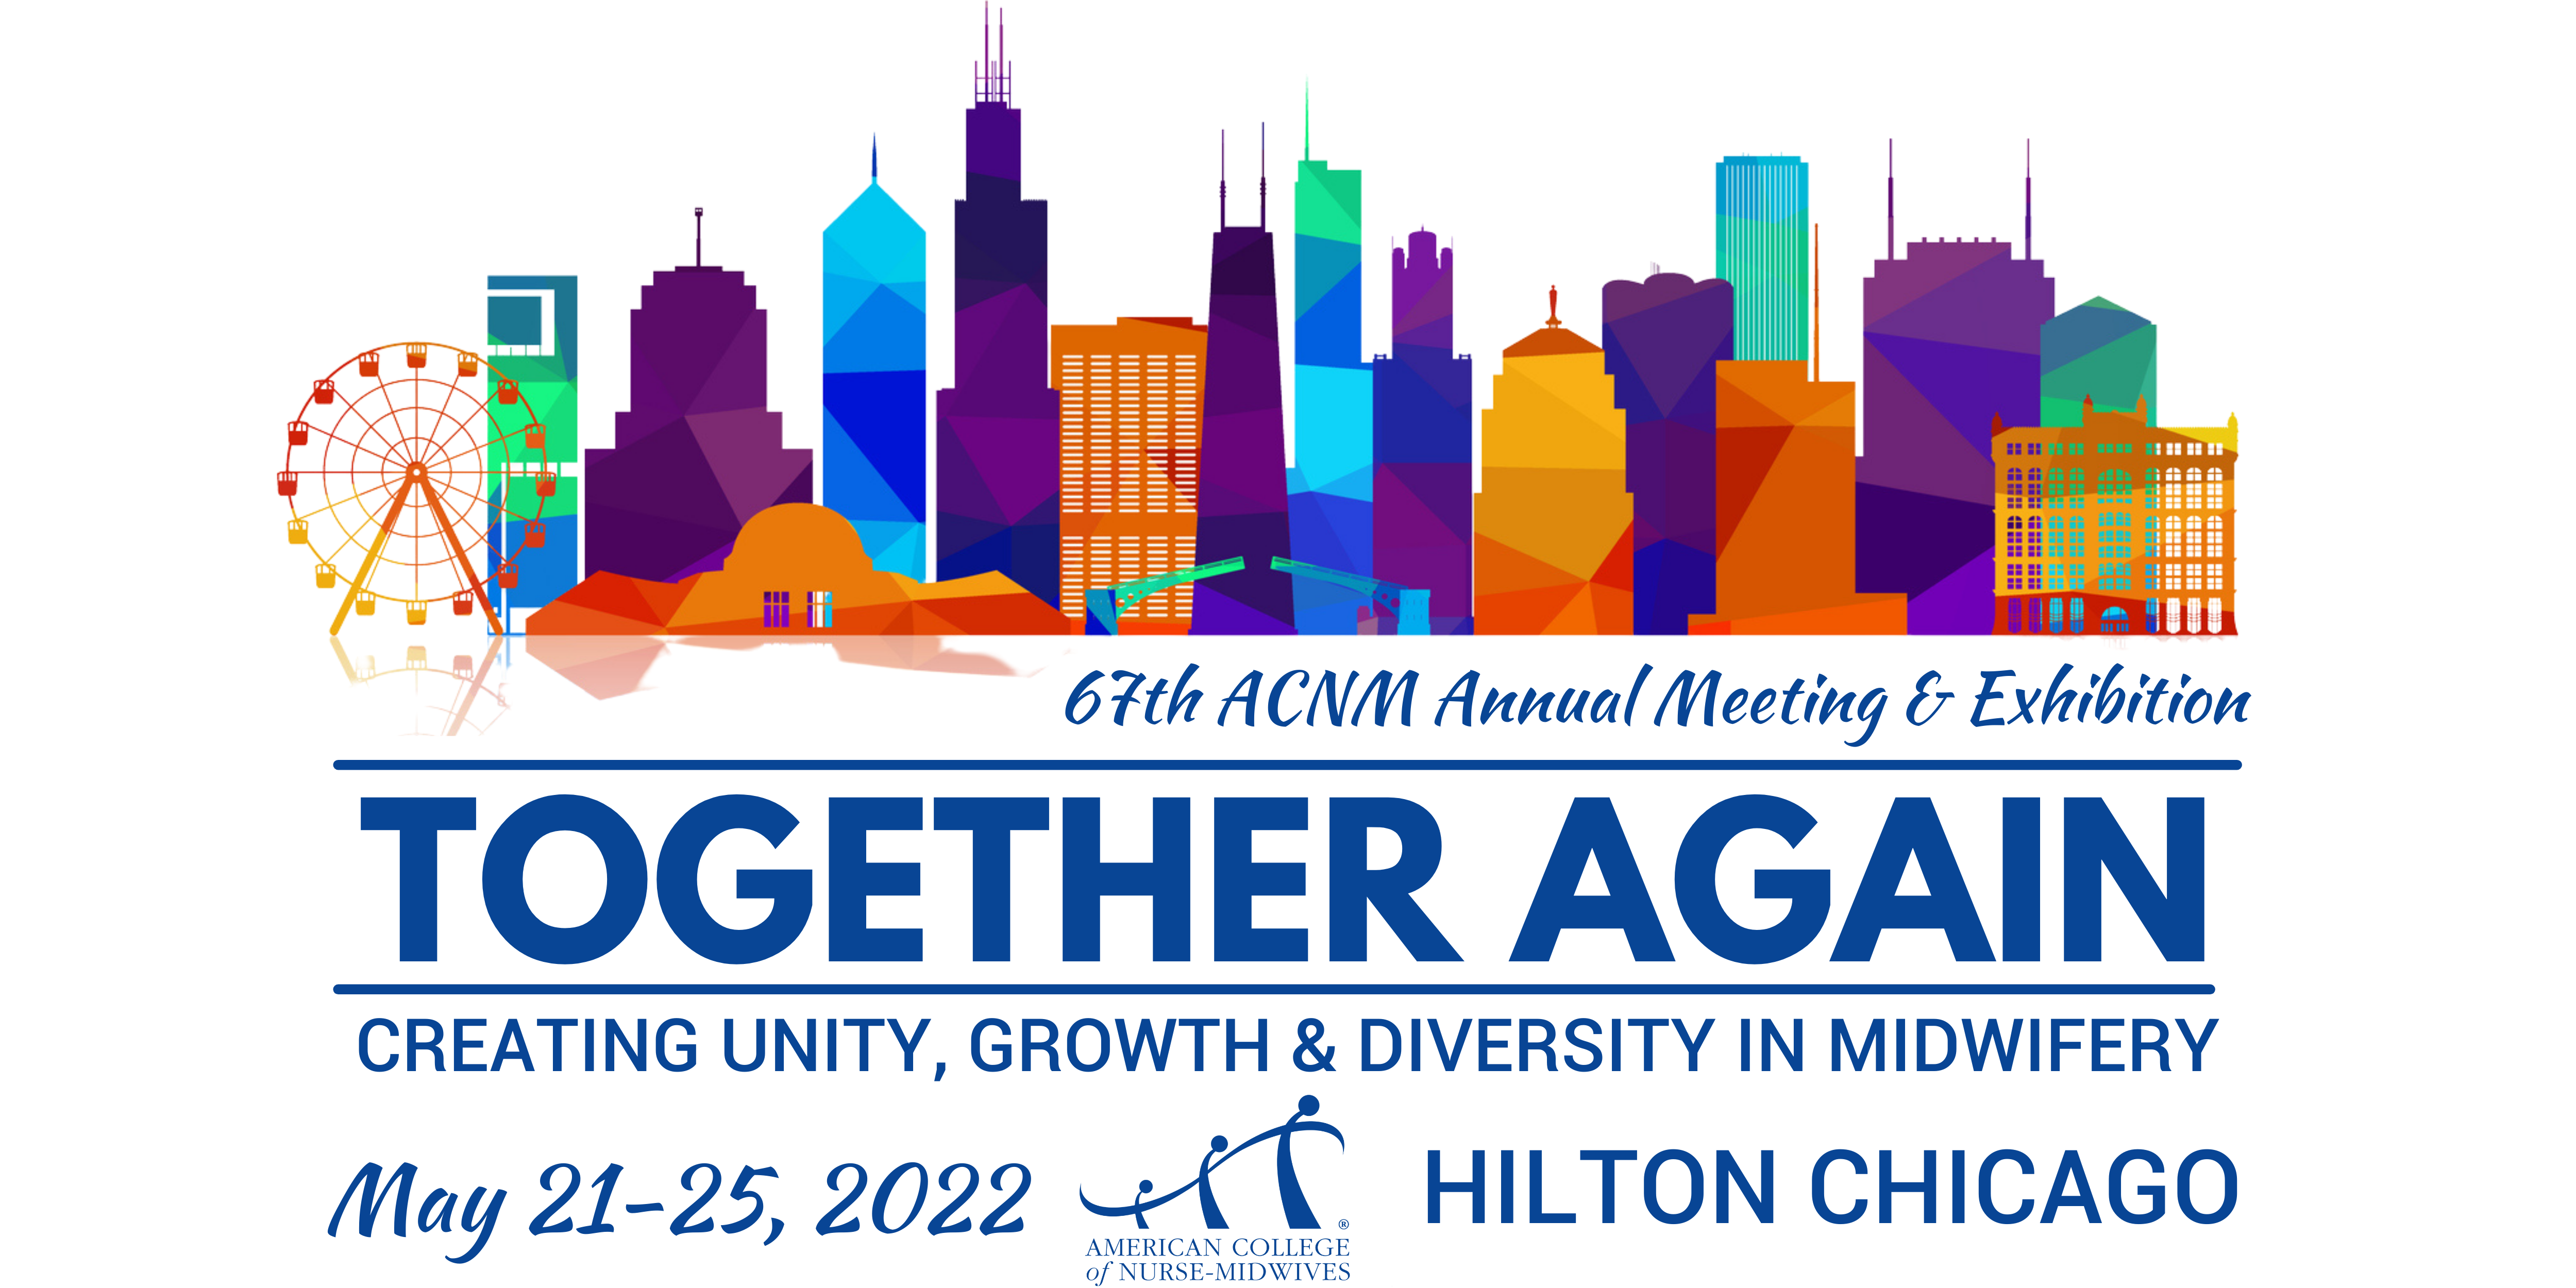 ACNM 67th Annual Meeting & Exhibition